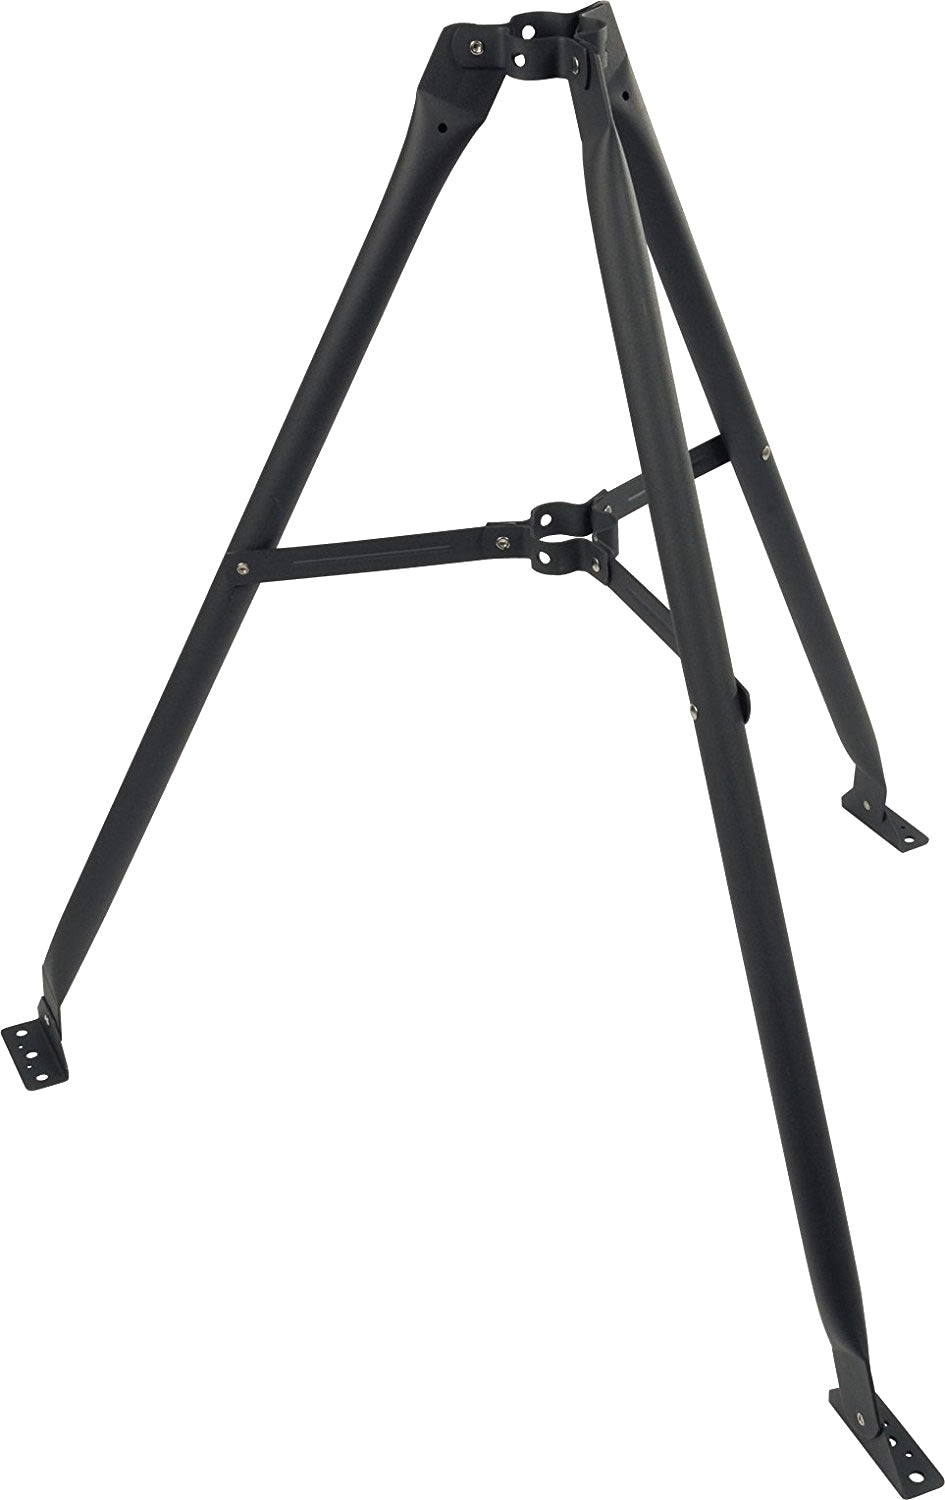 53-6403 Heavy Duty Stainless Tripod Stand - 3 FT